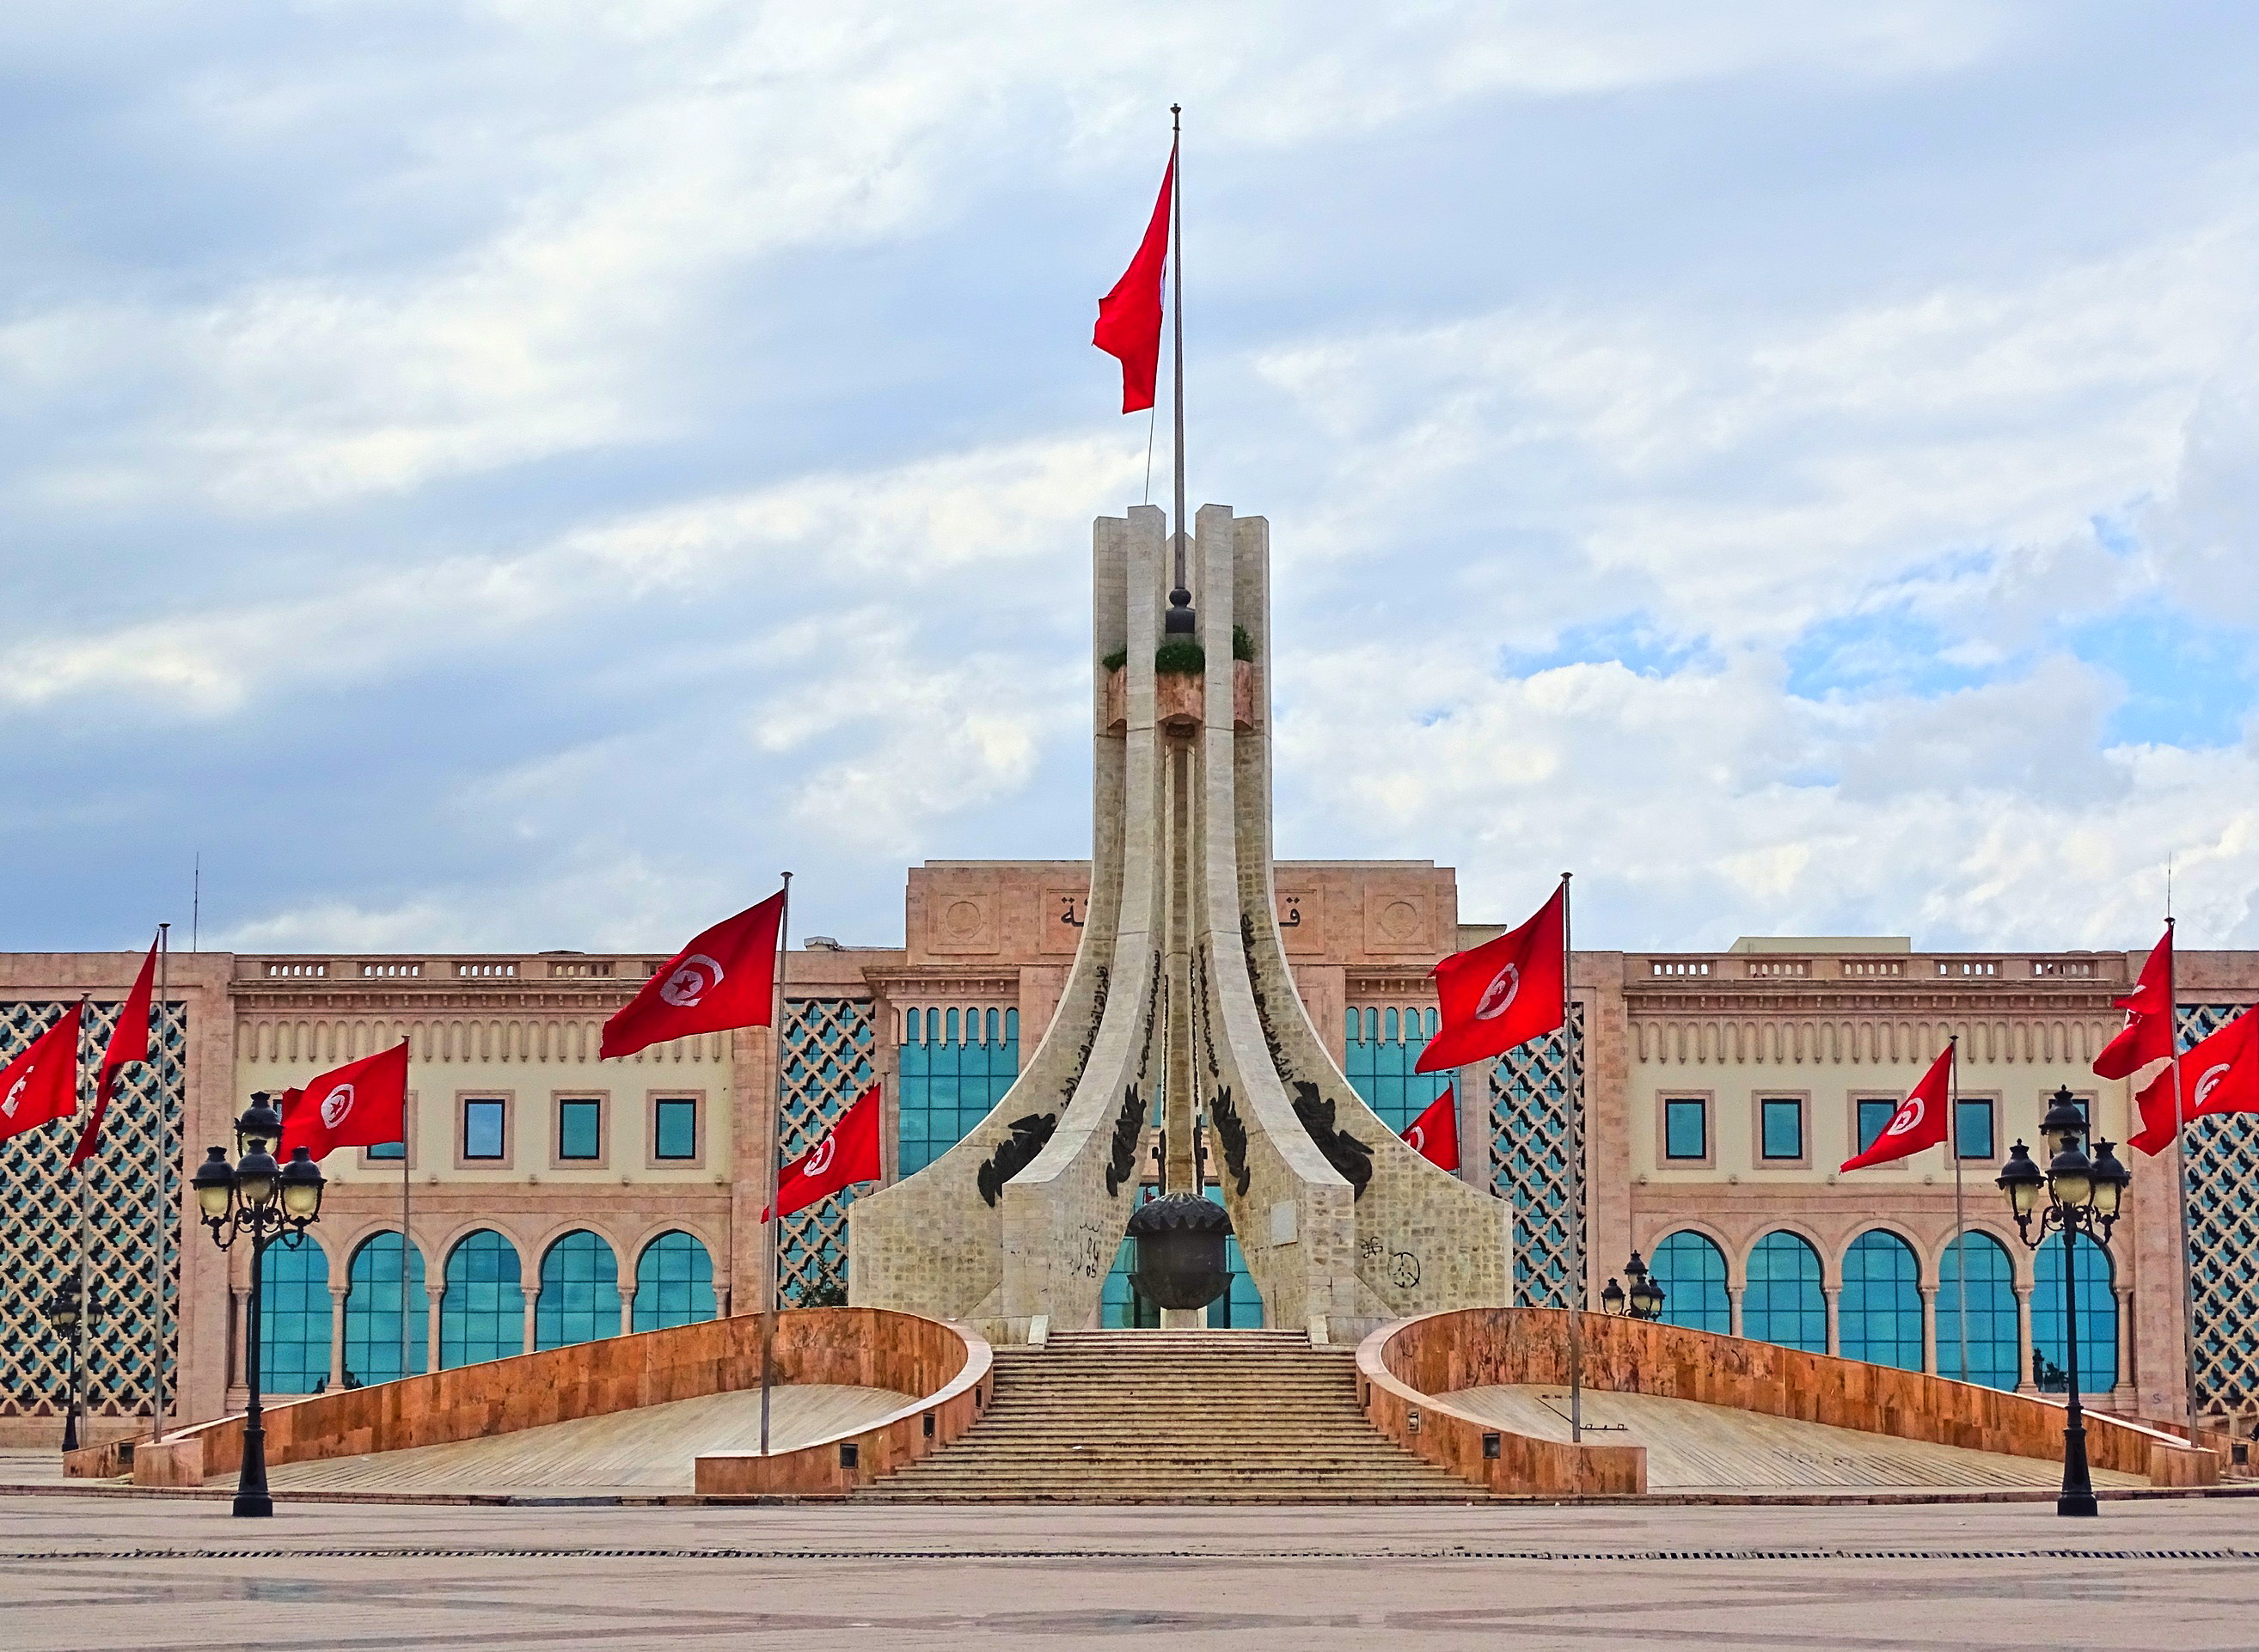 Tunisian national monument on the Place de la Kasbah in Tunis